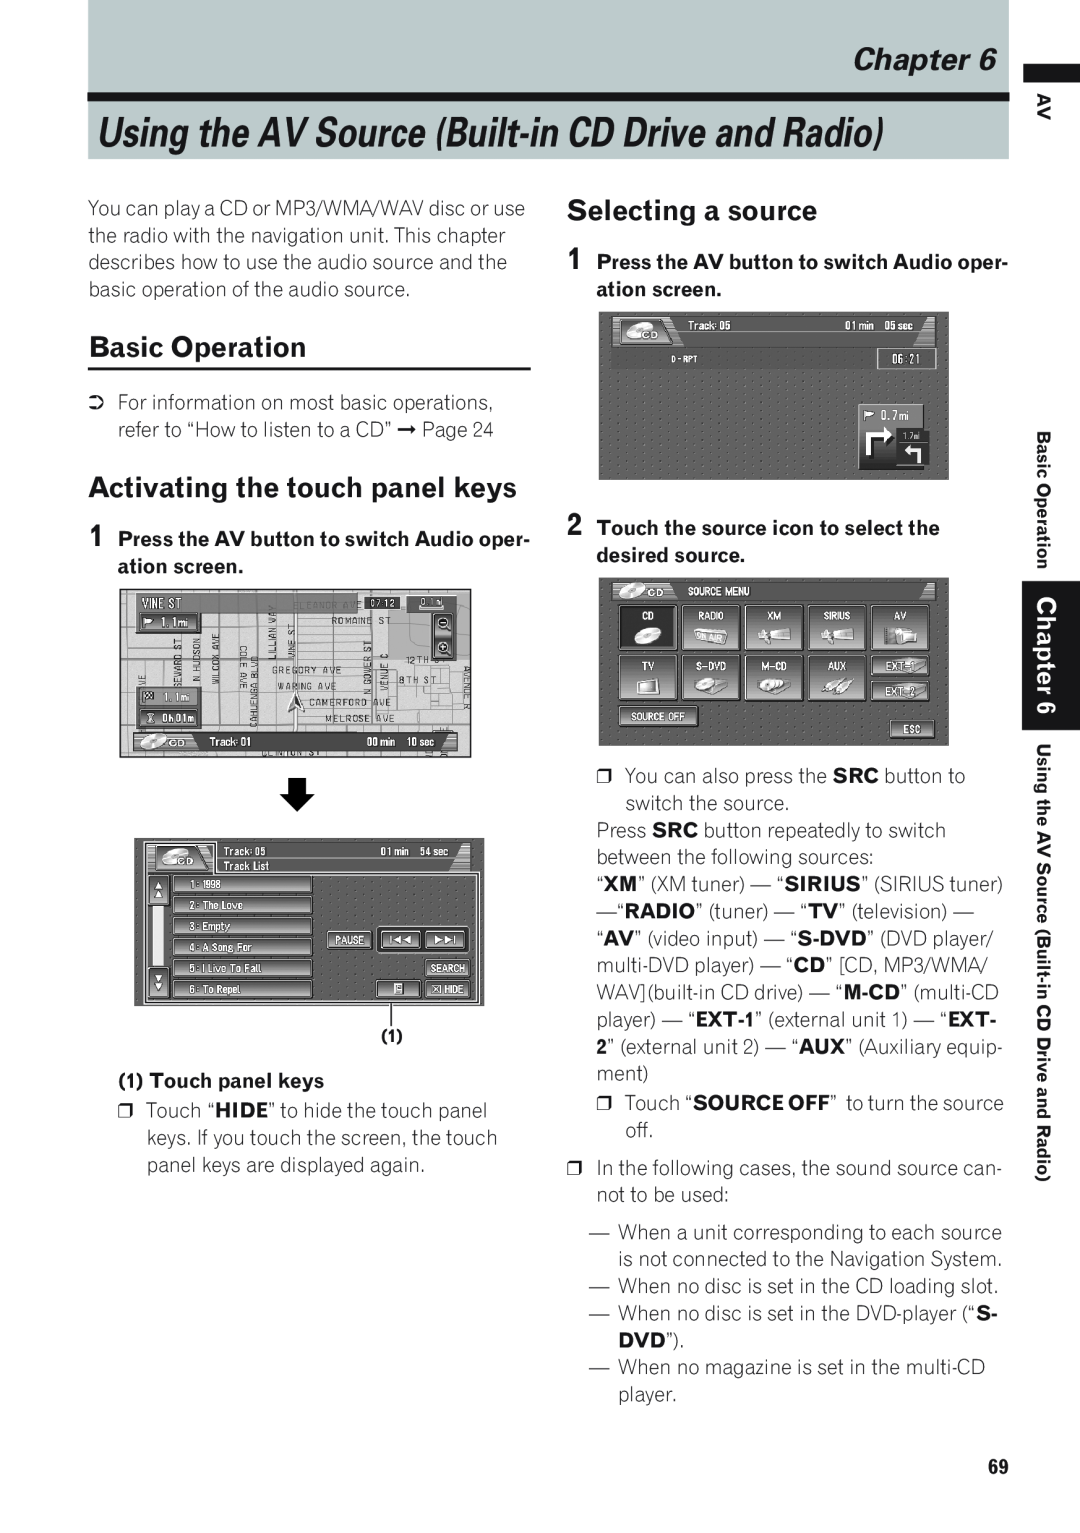 Pioneer AVIC-D1 operation manual Basic Operation, Activating the touch panel keys, Selecting a source, Chapter 